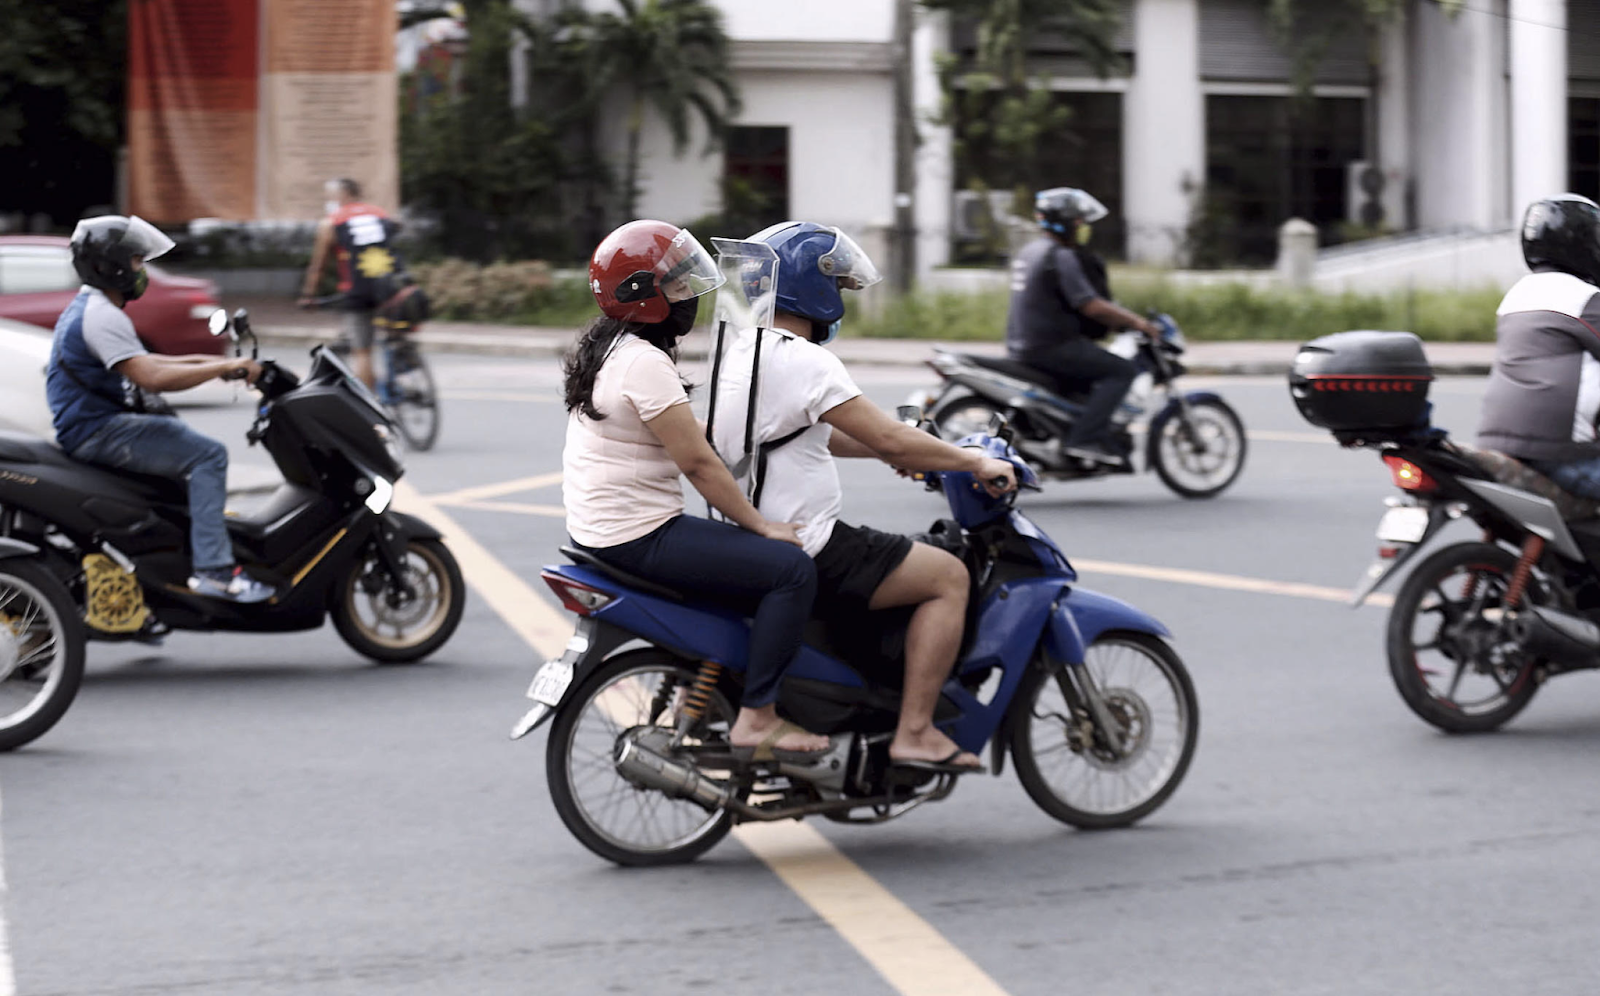 In post-COVID public transport, gov’t gives glance at motorcycle taxis